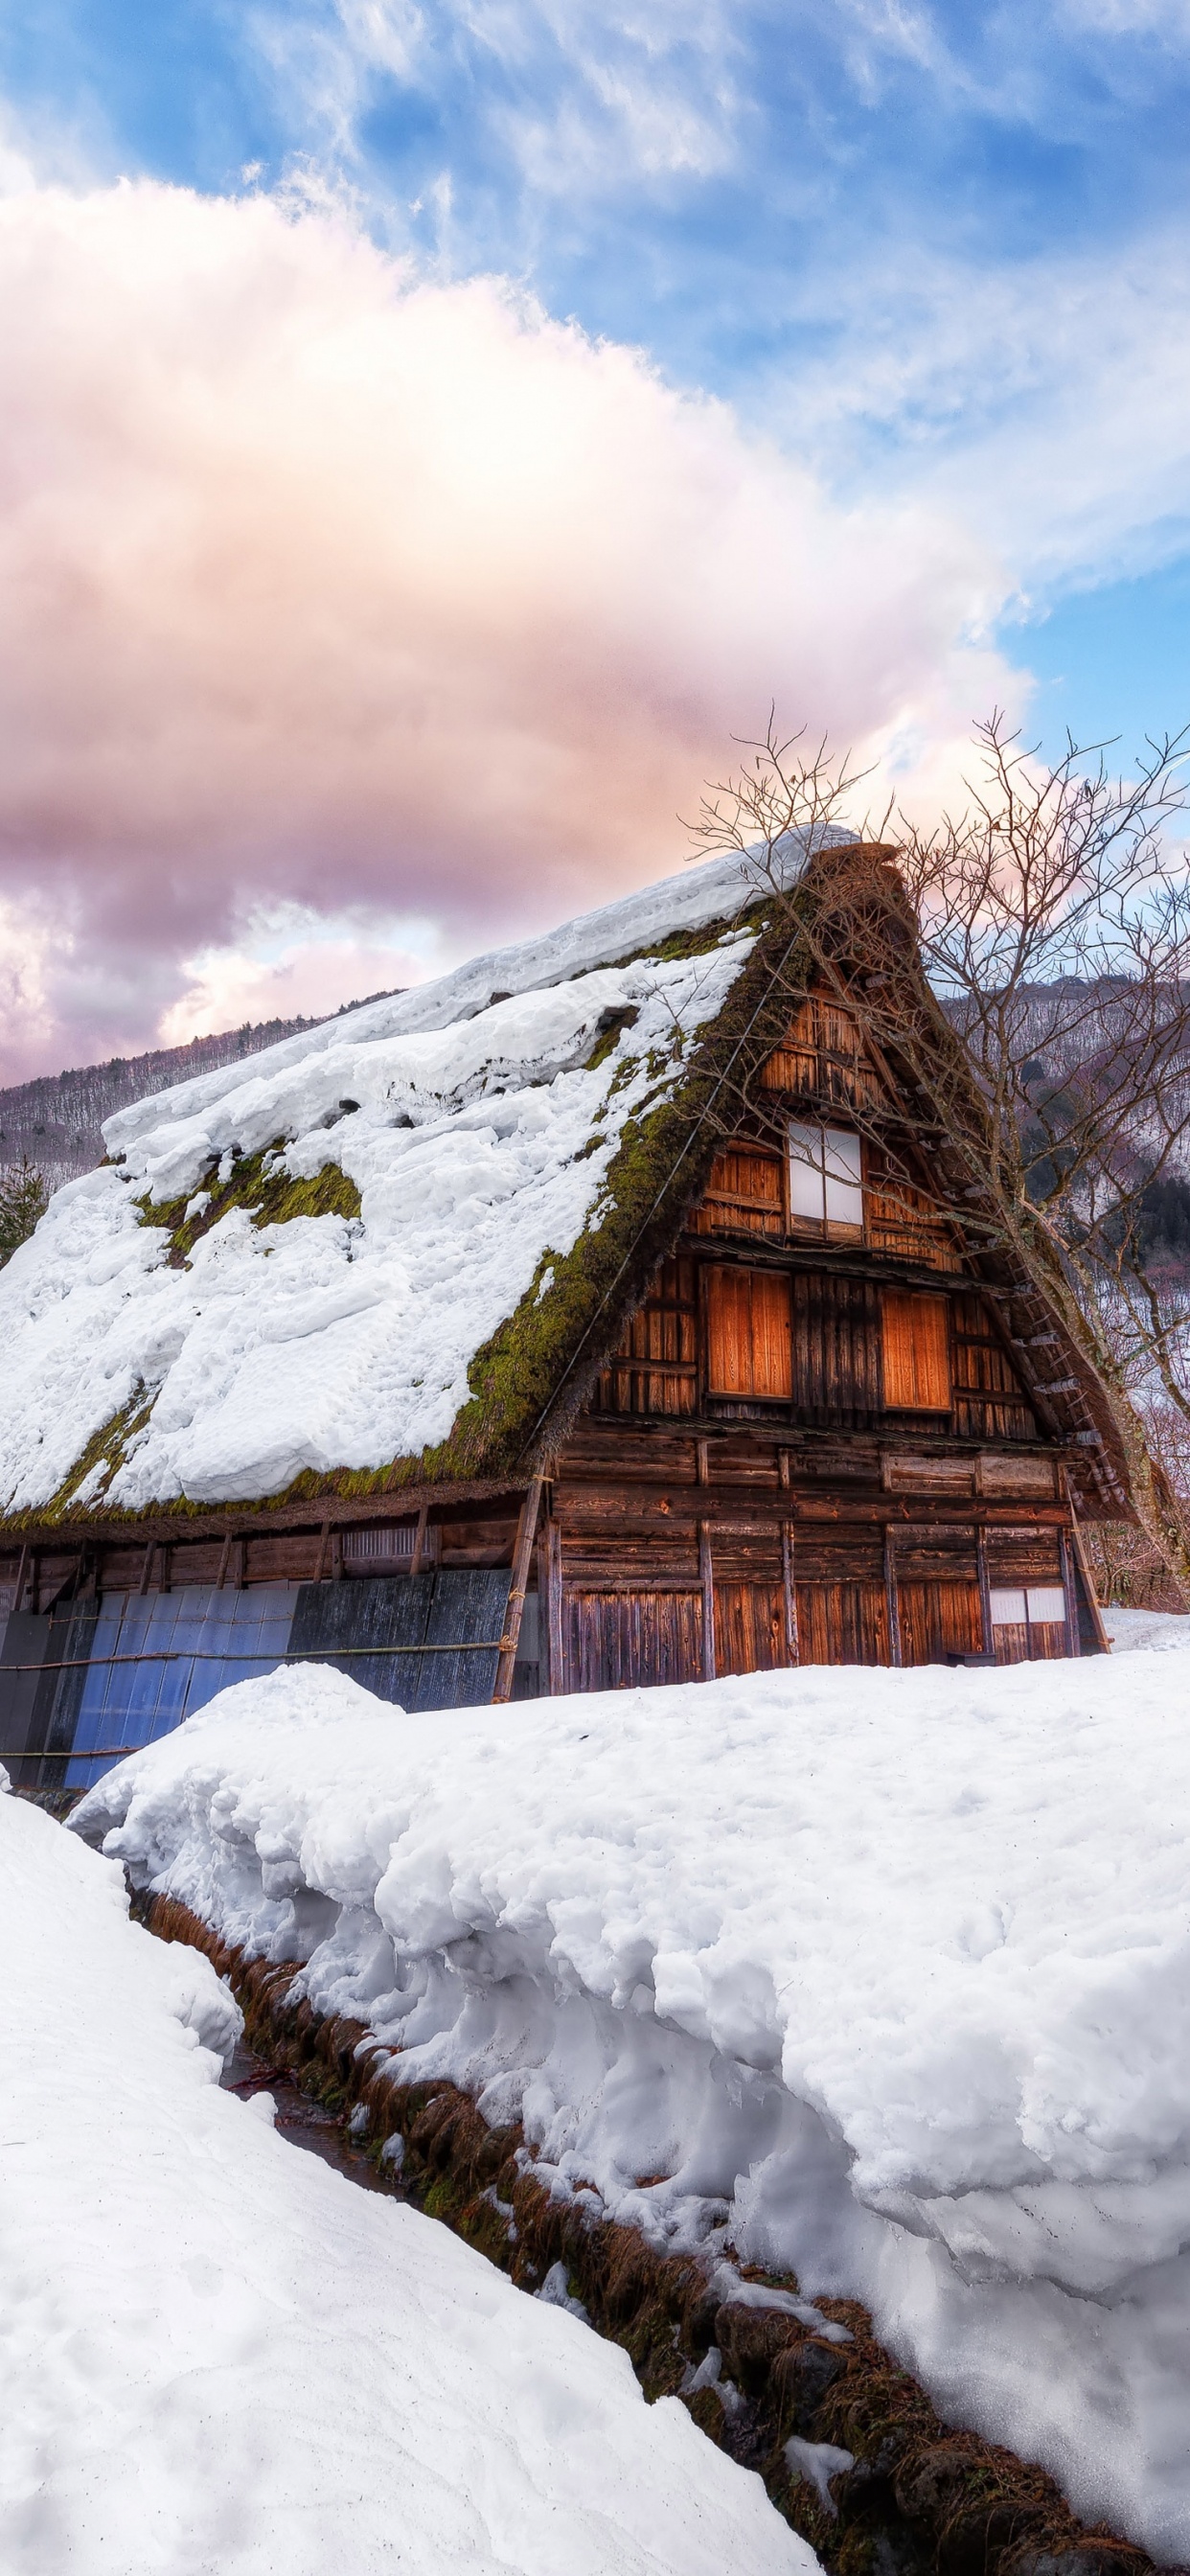 Brown Wooden House on Snow Covered Ground Under White Clouds and Blue Sky During Daytime. Wallpaper in 1242x2688 Resolution